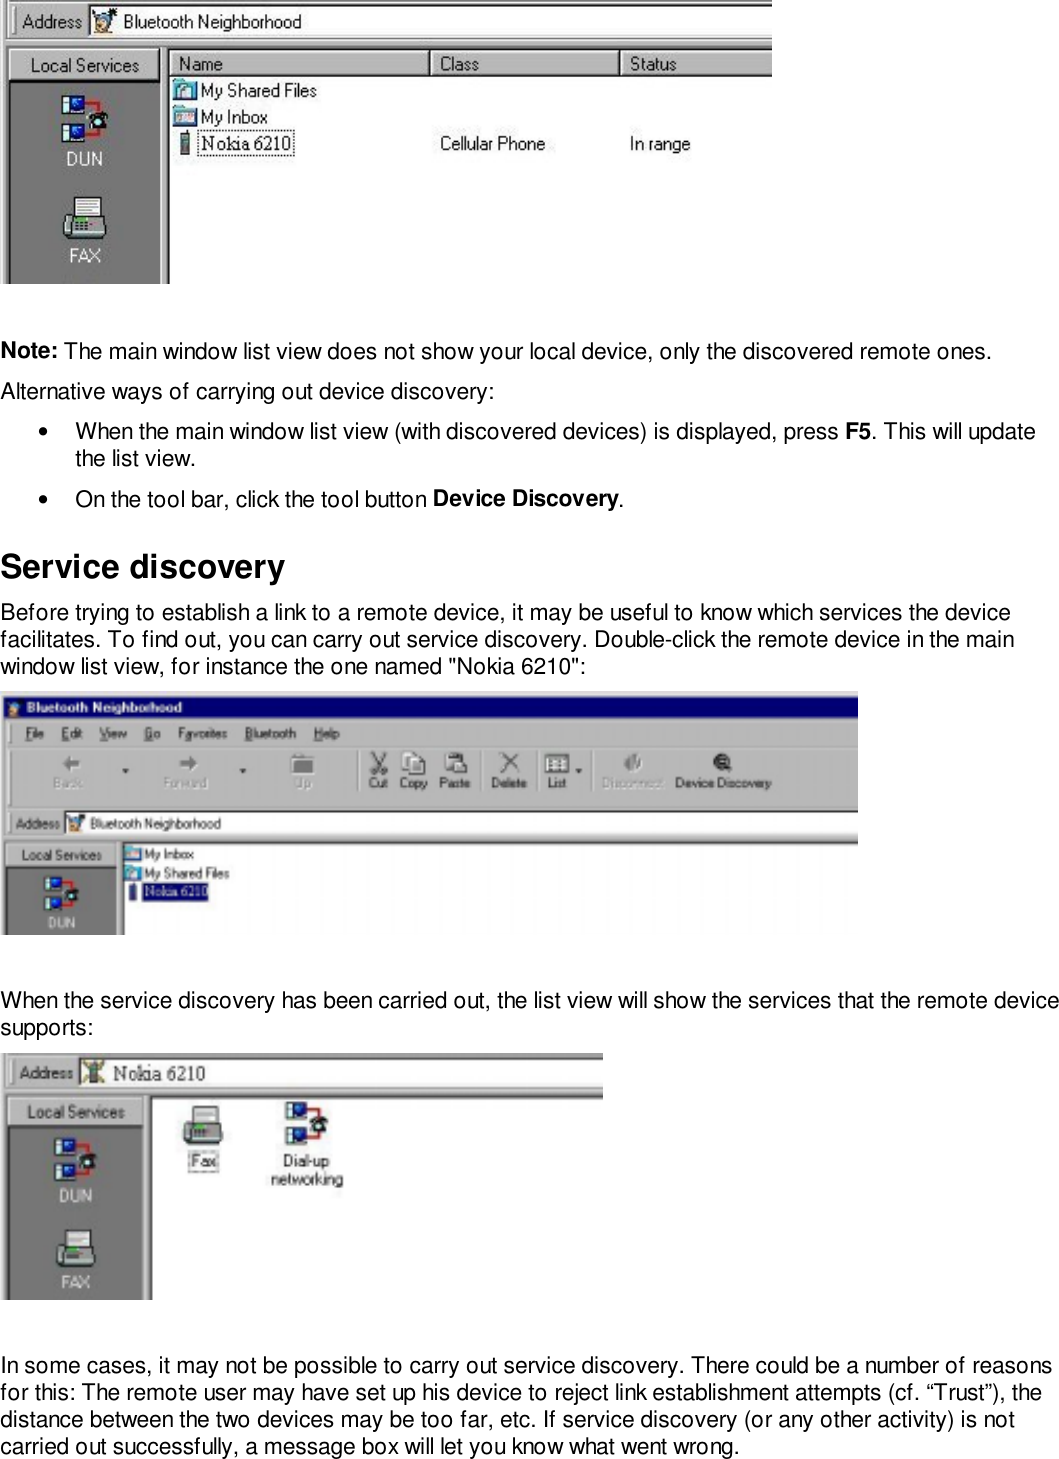 Note: The main window list view does not show your local device, only the discovered remote ones.Alternative ways of carrying out device discovery:•  When the main window list view (with discovered devices) is displayed, press F5. This will updatethe list view.•  On the tool bar, click the tool button Device Discovery.Service discoveryBefore trying to establish a link to a remote device, it may be useful to know which services the devicefacilitates. To find out, you can carry out service discovery. Double-click the remote device in the mainwindow list view, for instance the one named &quot;Nokia 6210&quot;:When the service discovery has been carried out, the list view will show the services that the remote devicesupports:In some cases, it may not be possible to carry out service discovery. There could be a number of reasonsfor this: The remote user may have set up his device to reject link establishment attempts (cf. “Trust”), thedistance between the two devices may be too far, etc. If service discovery (or any other activity) is notcarried out successfully, a message box will let you know what went wrong.